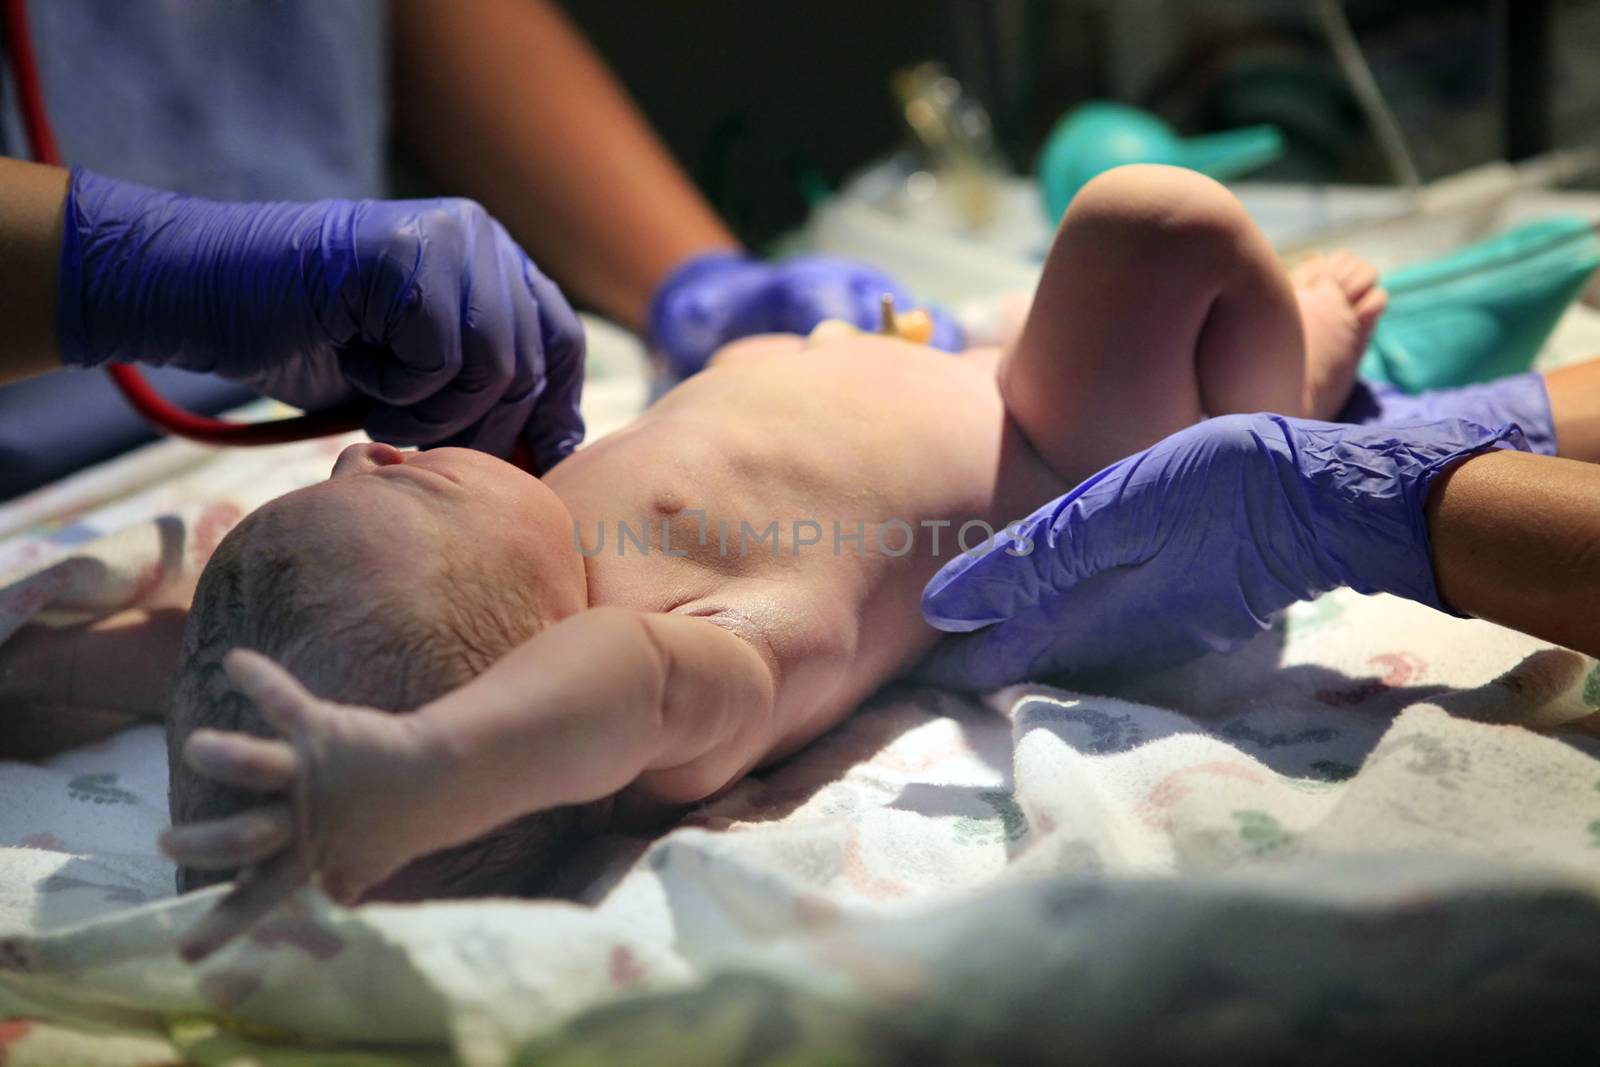 The first minutes of life of the newborn girl